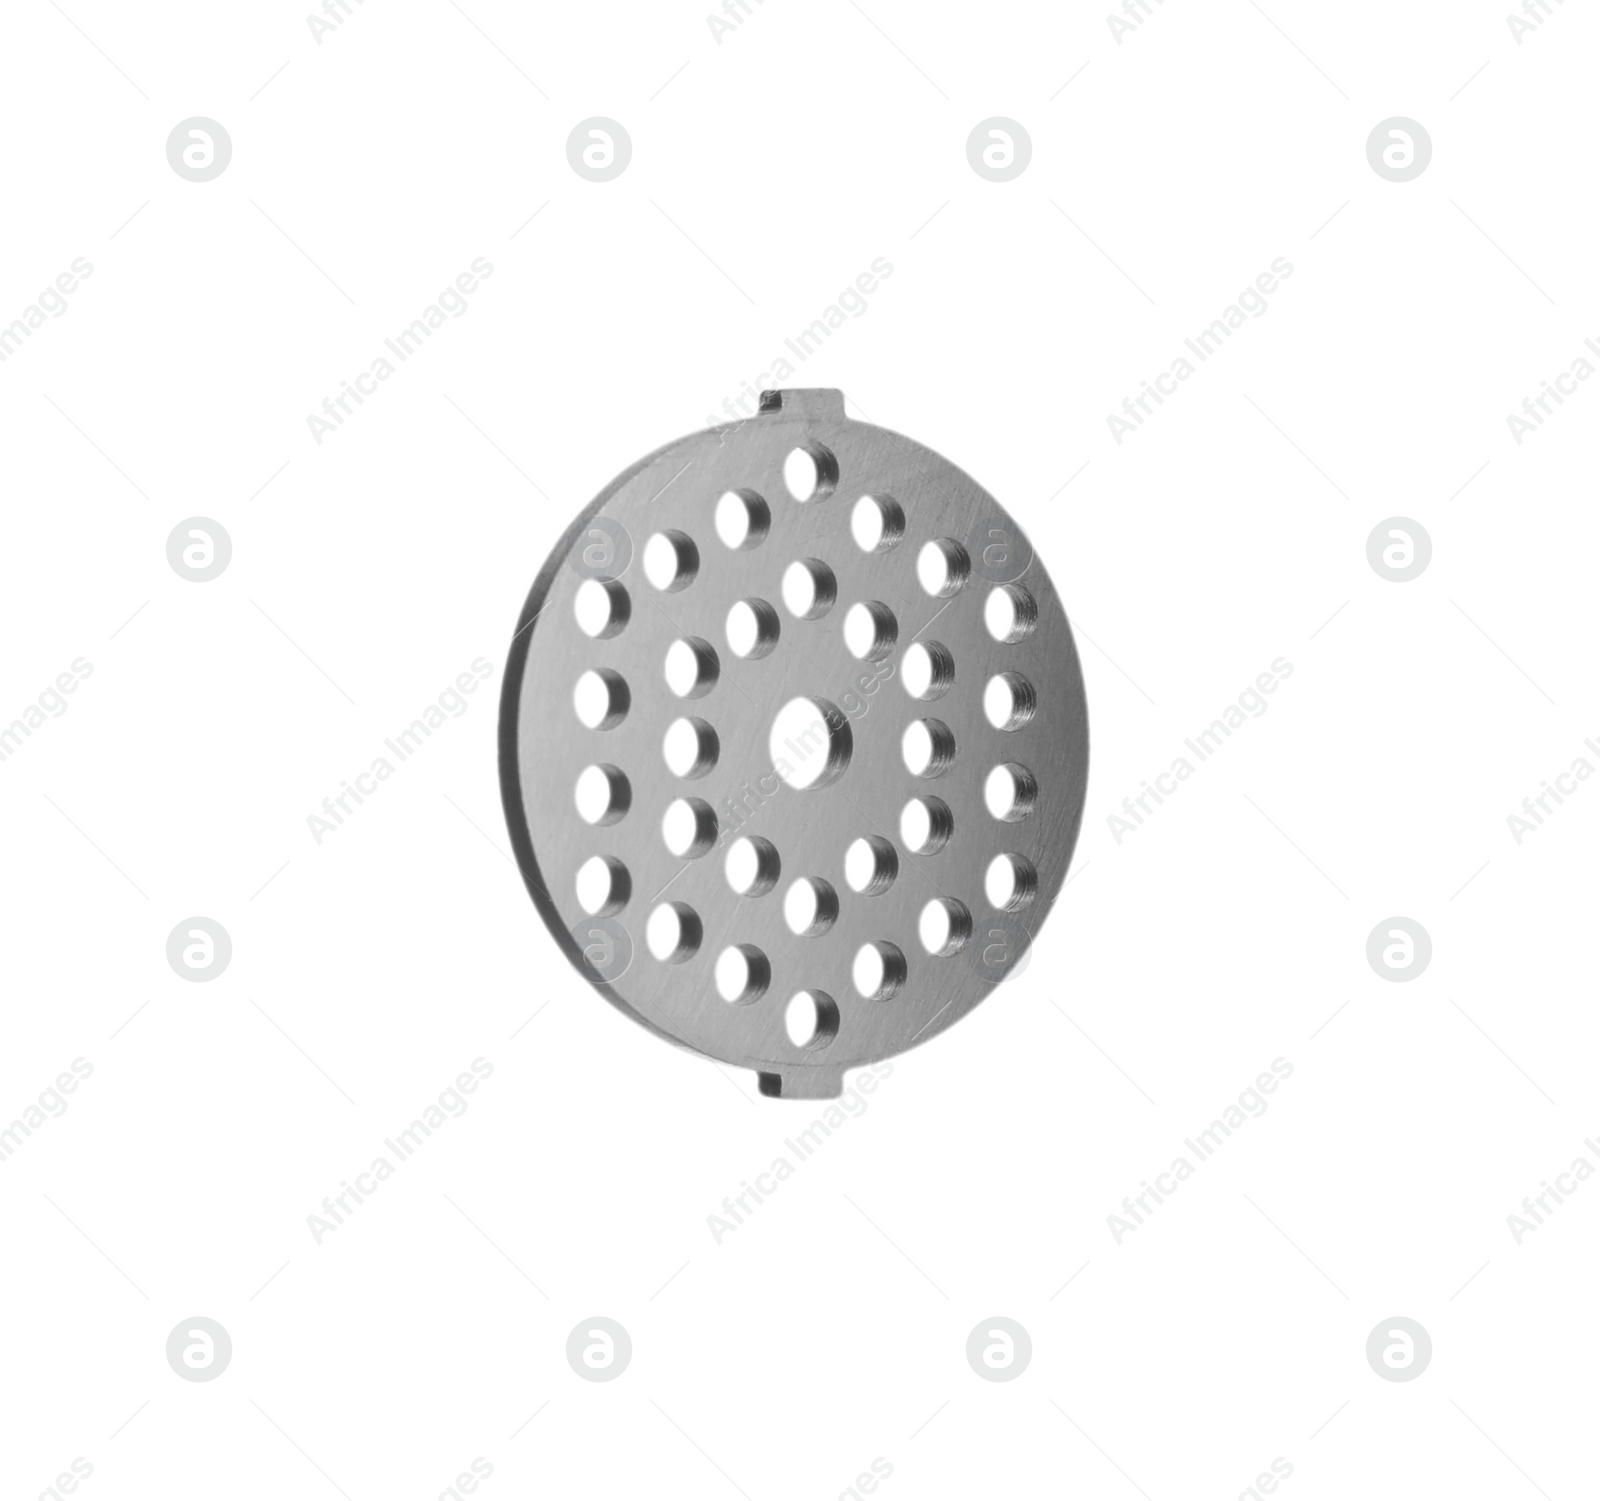 Photo of Metal grinding plate for meat grinder isolated on white